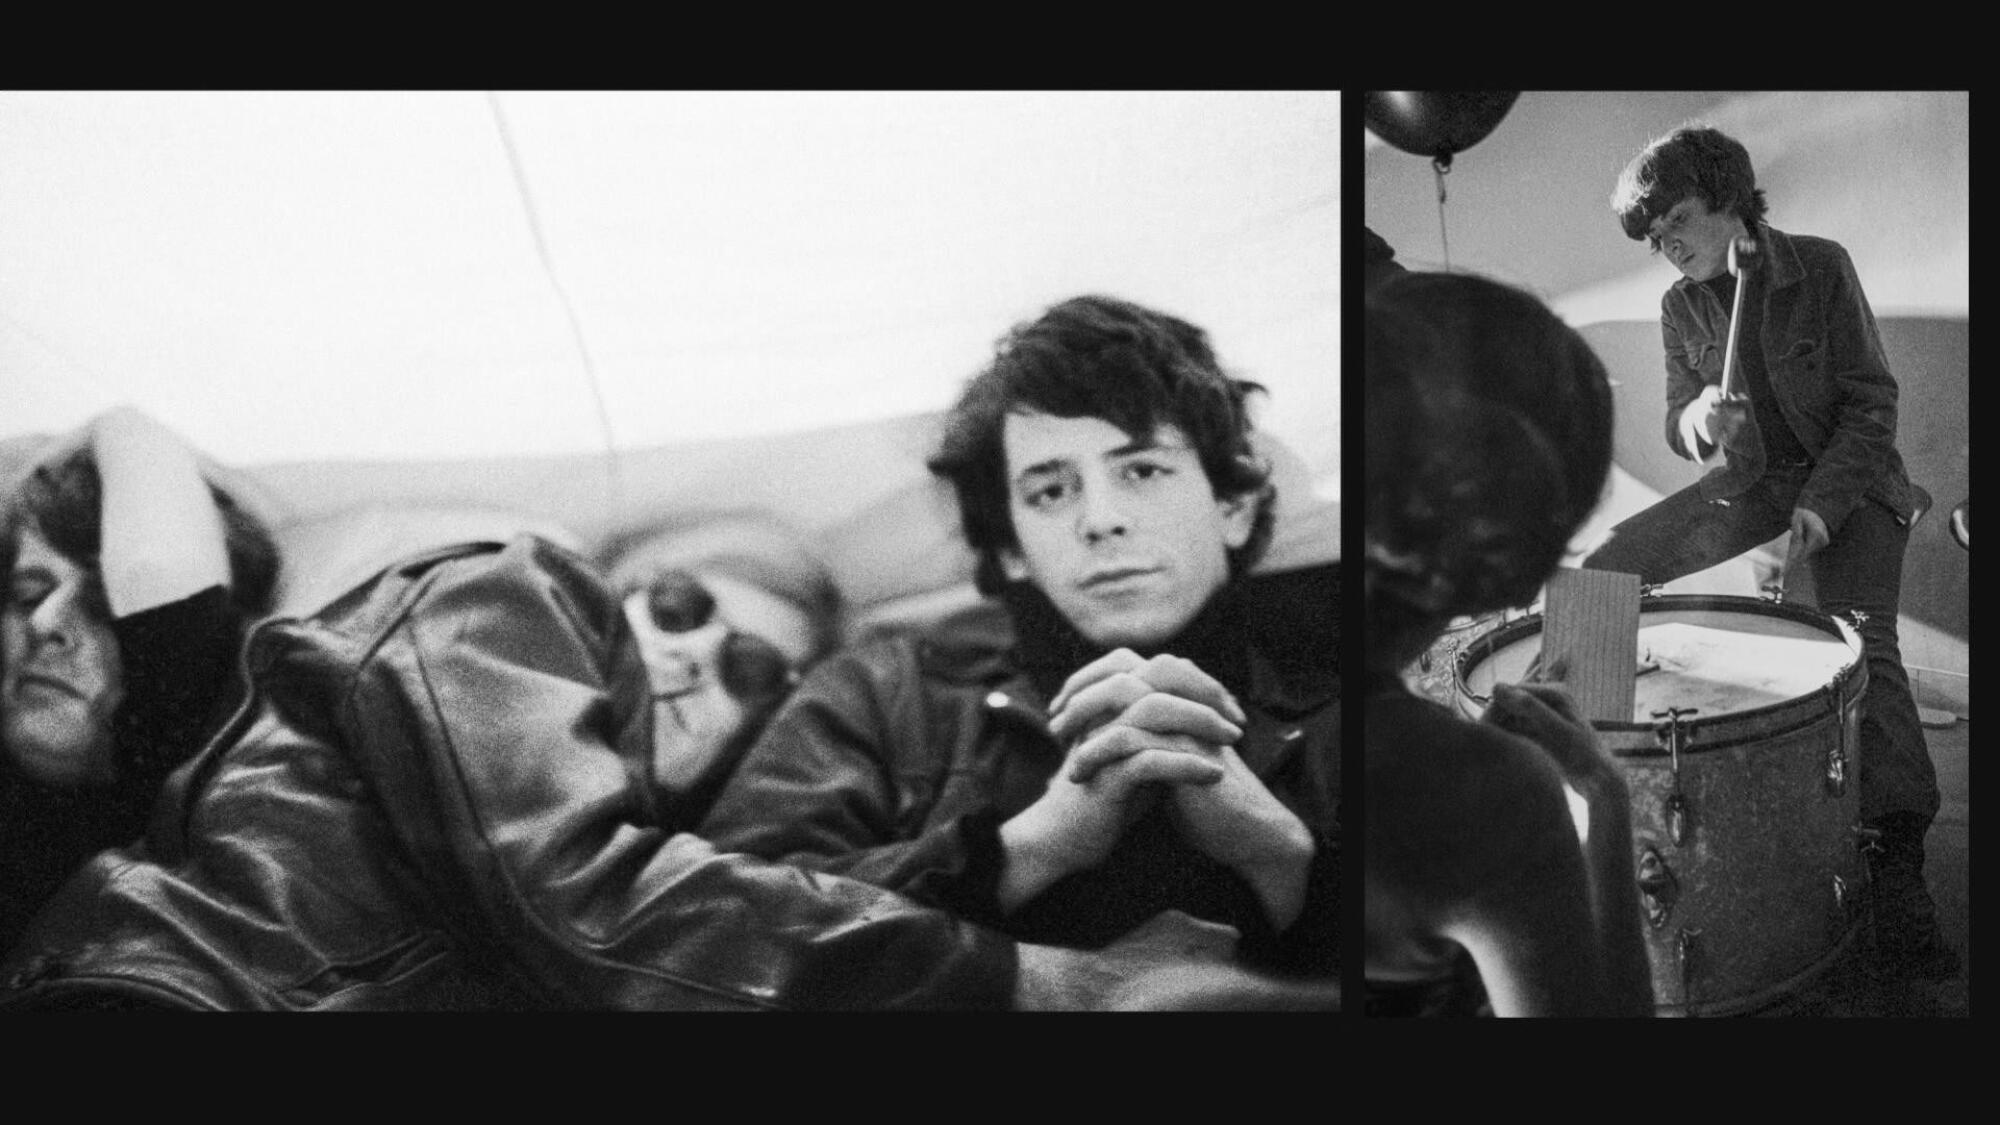 Black-and-white photos of Paul Morrissey, Andy Warhol and Lou Reed on a couch and Moe Tucker playing drums.